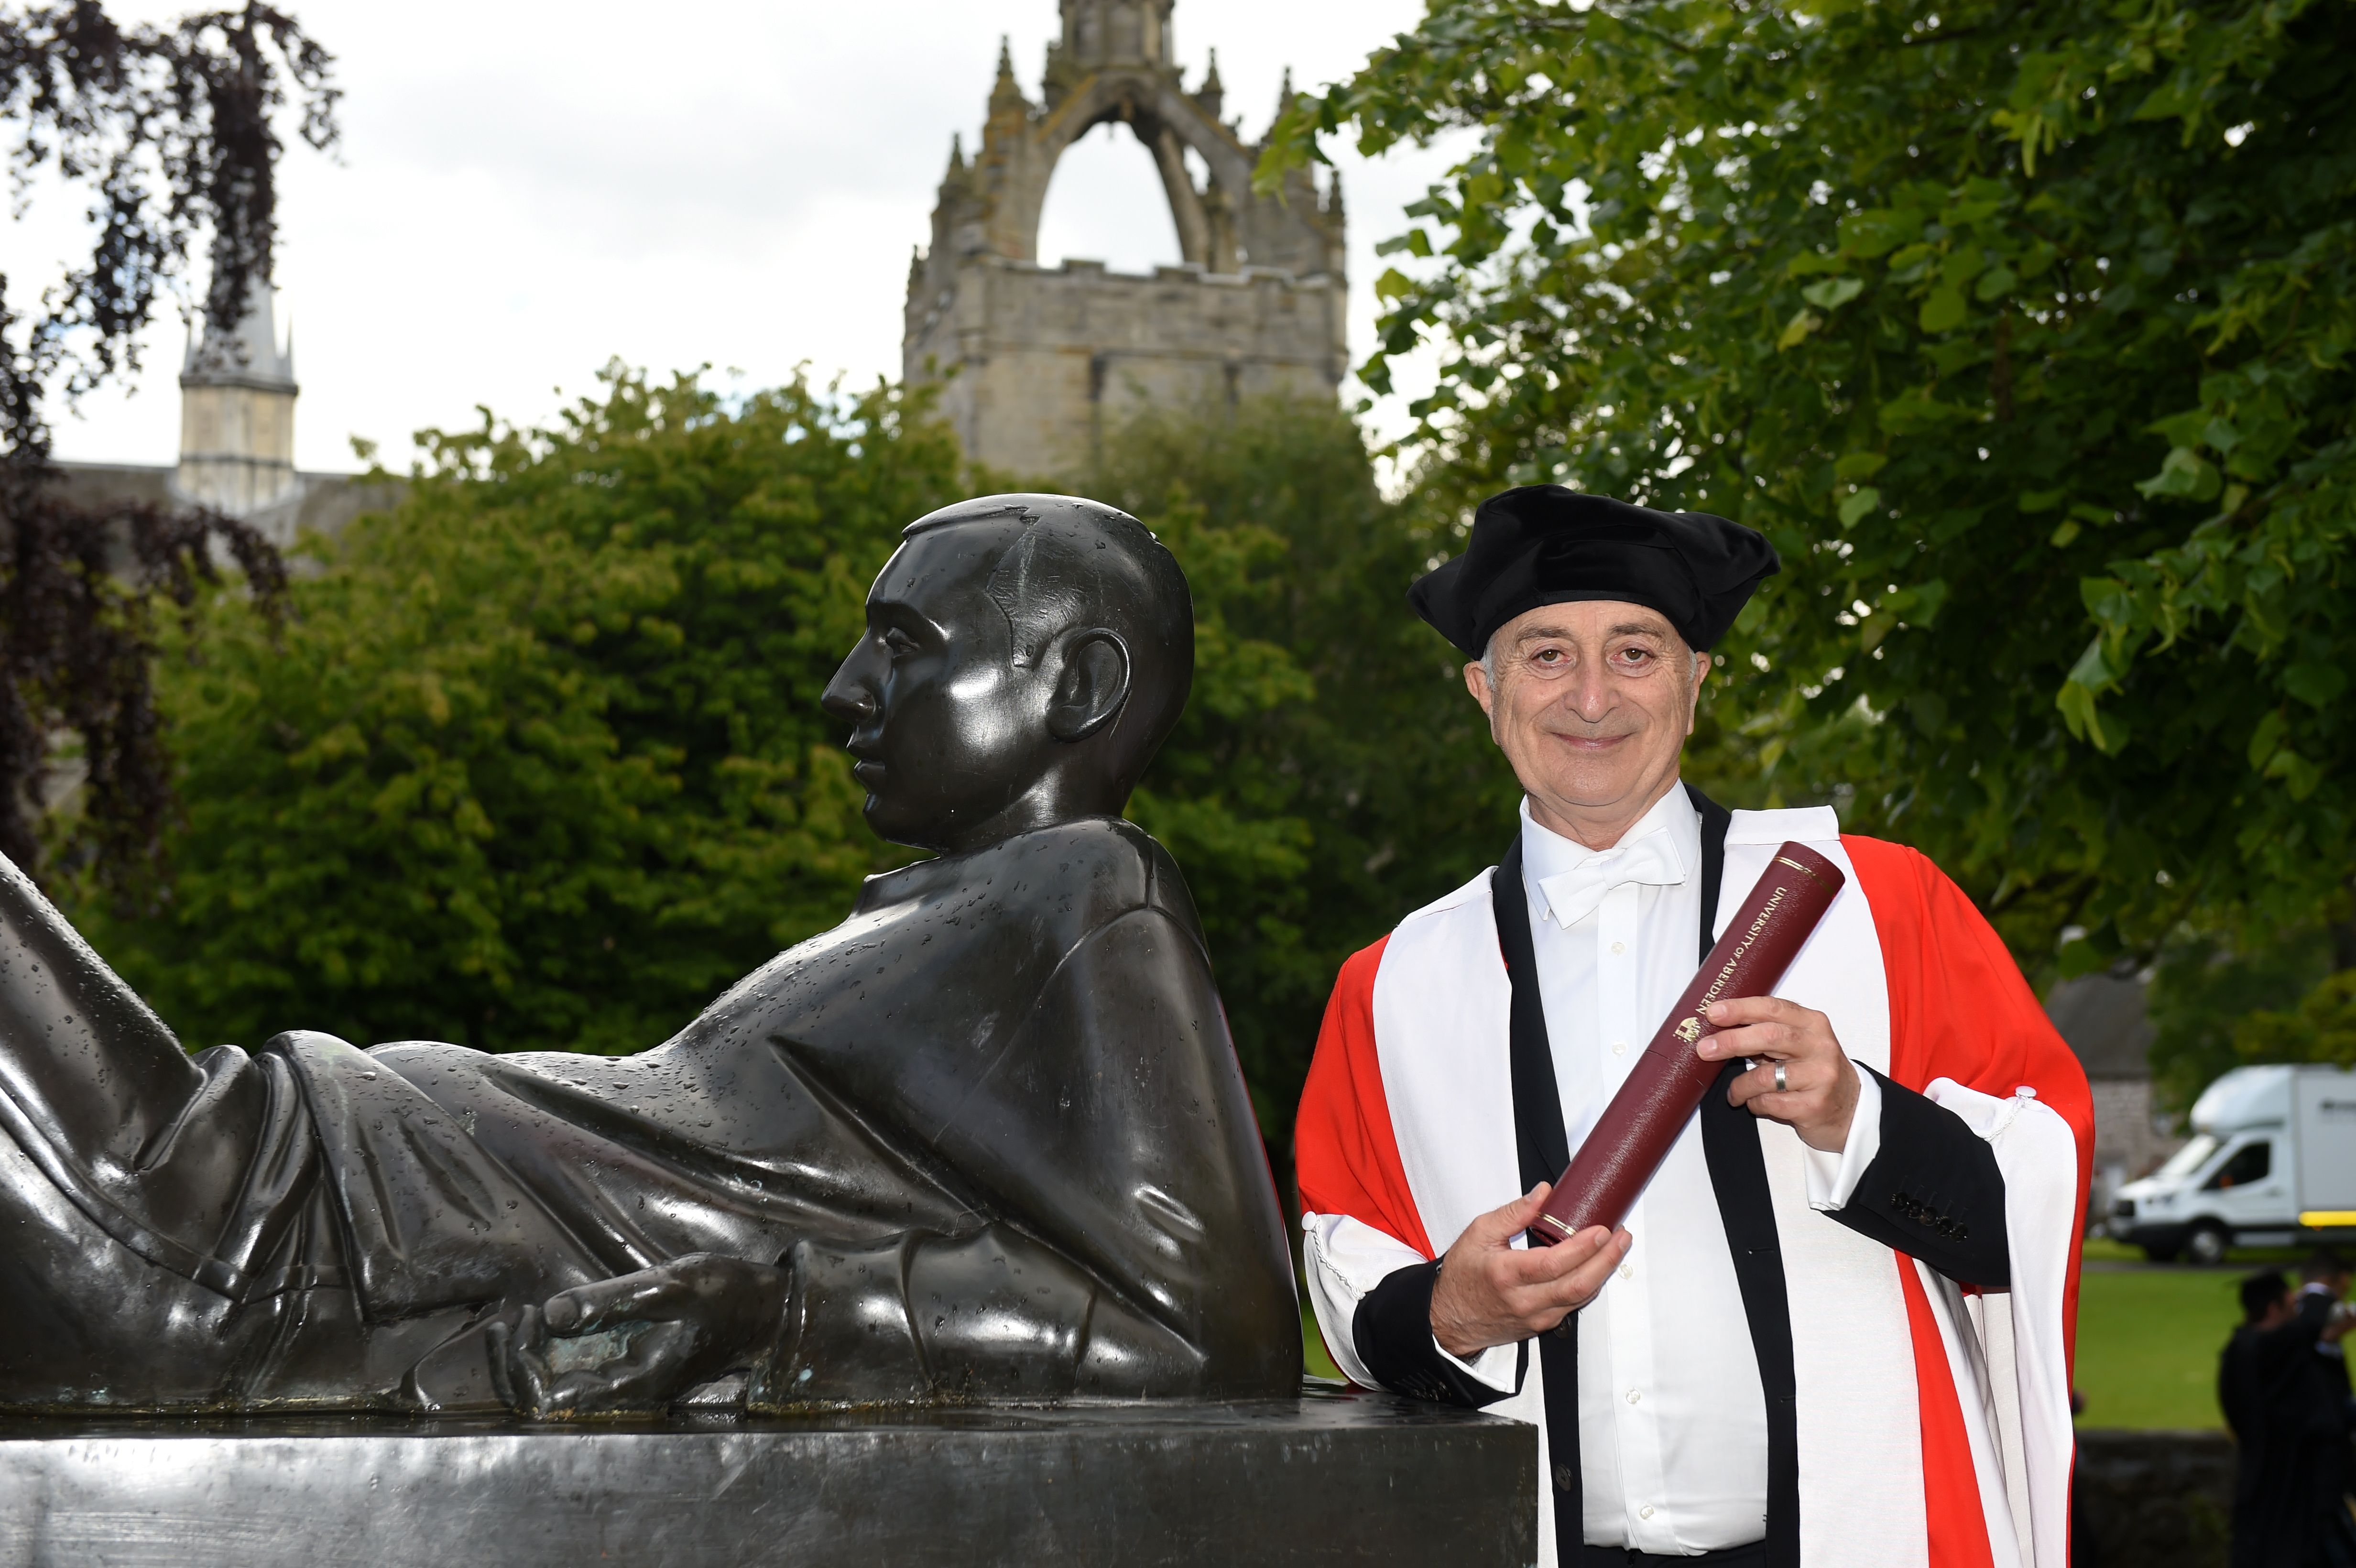 CR0010591
Aberdeen University Graduation 2019, at Elphinstone Hall, King's College campus, at Old Aberdeen.
Picture of Sir Tony Robinson, honorary doctorate.

Picture by KENNY ELRICK     17/06/2019